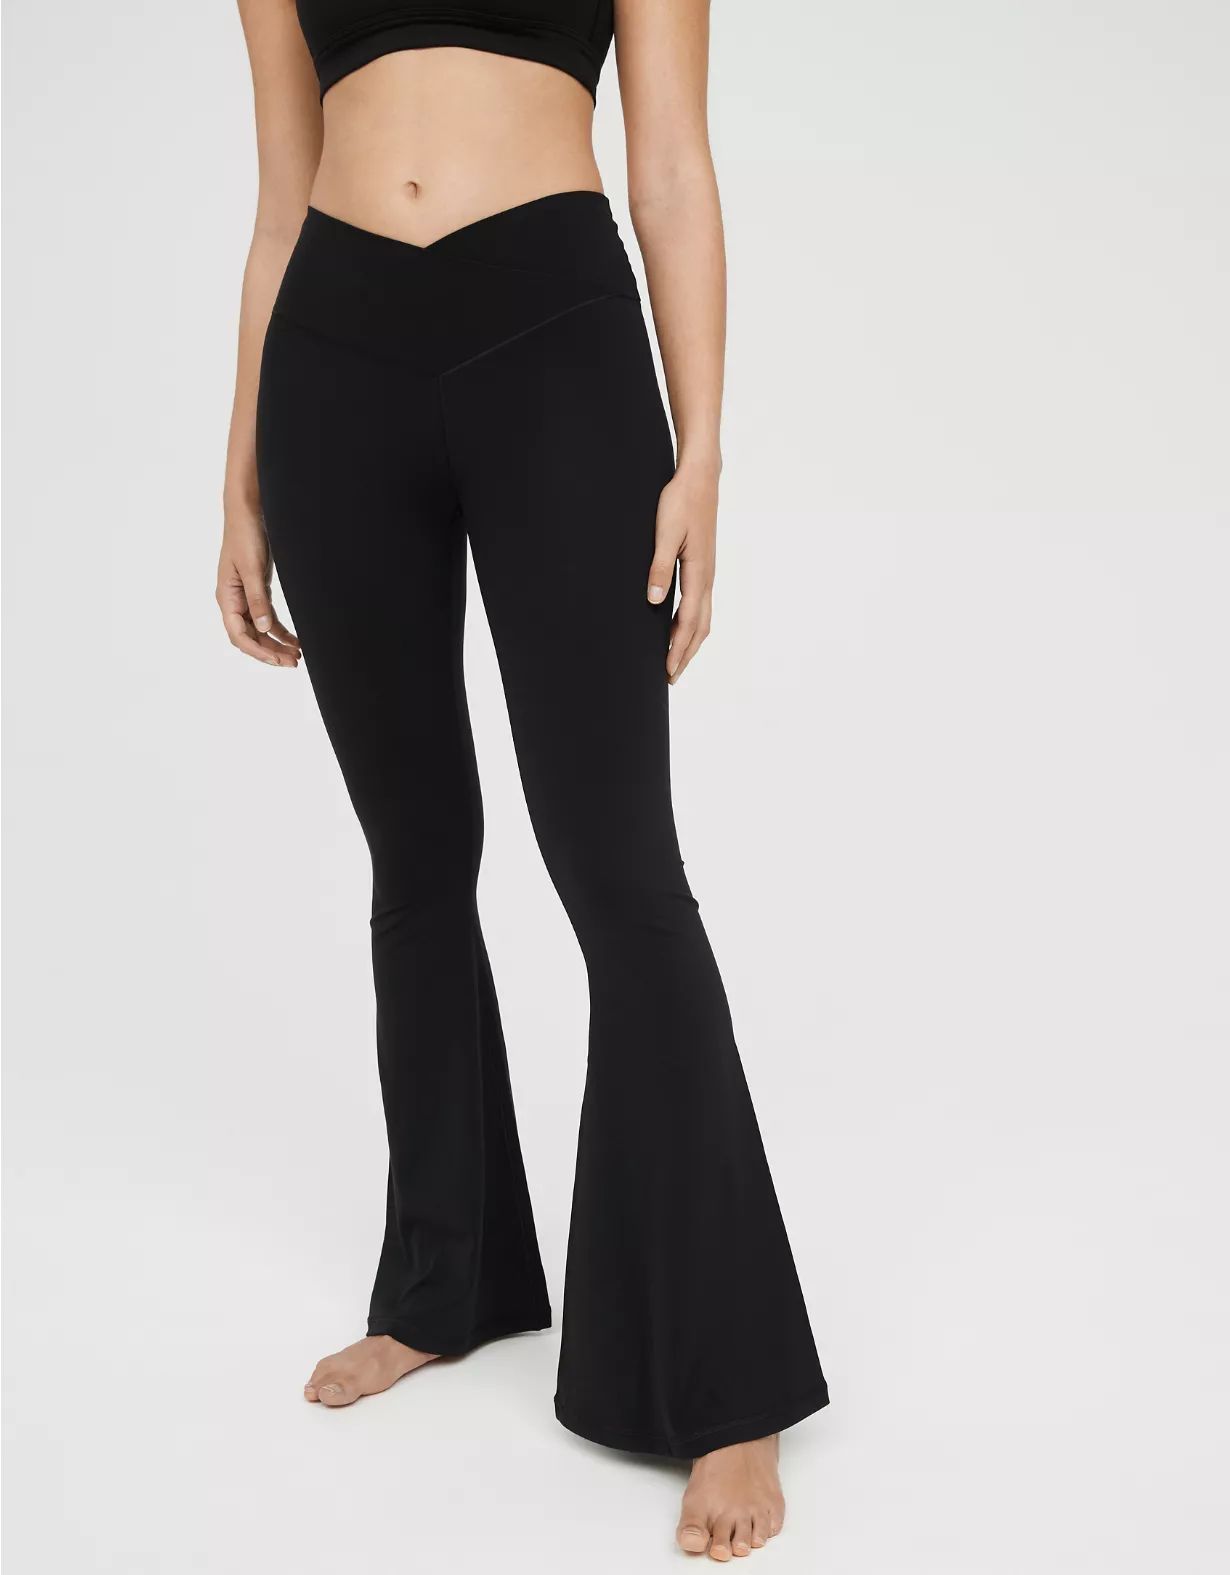 OFFLINE By Aerie Real Me High Waisted Crossover Super Flare Legging | Aerie